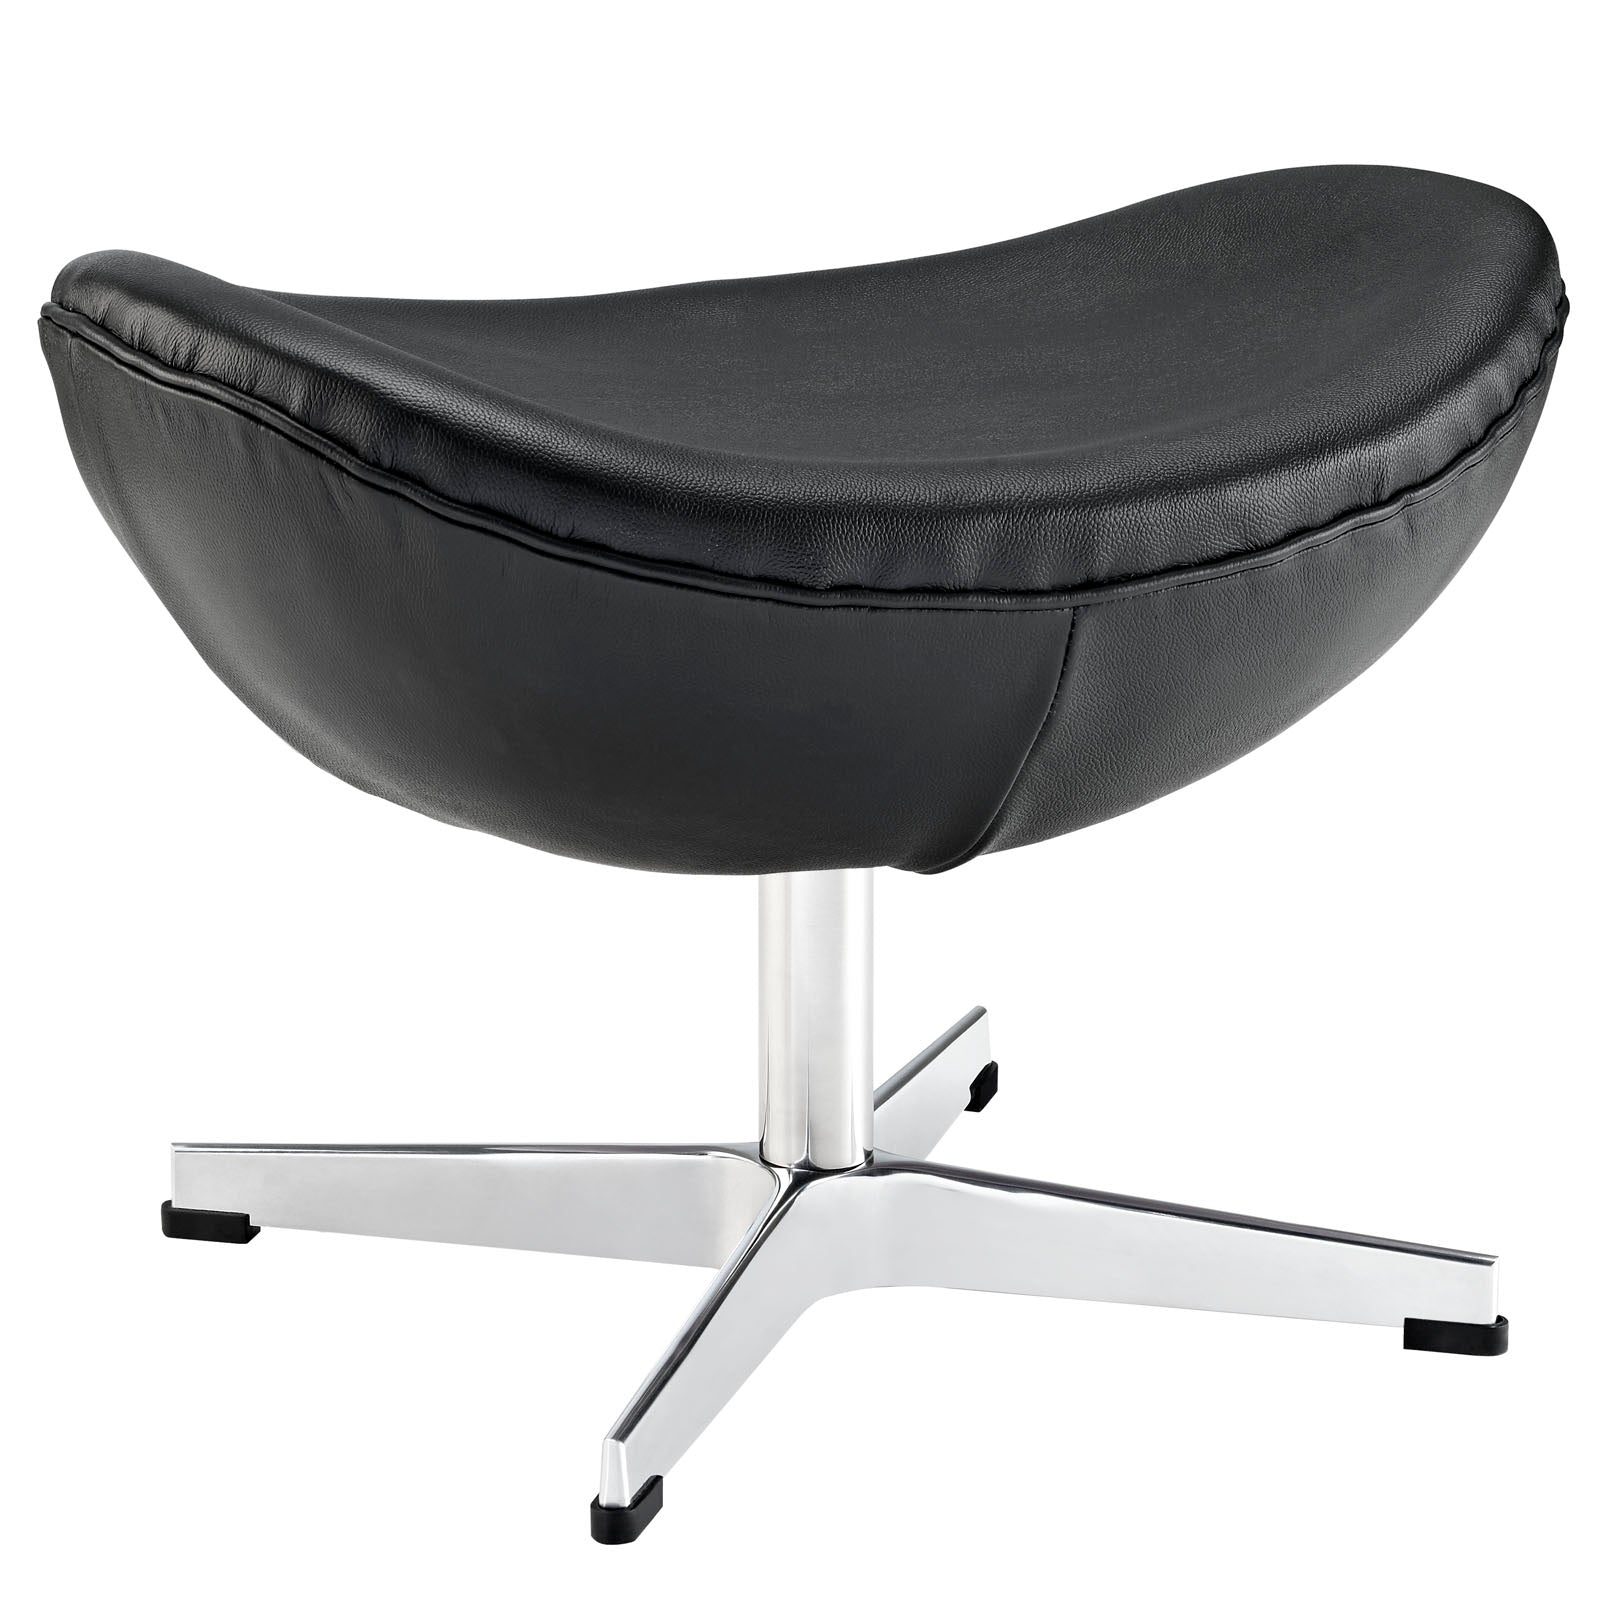 Modern Contemporary Room Furniture Glove Ottoman In Black Leather With Cozy Foam Frame